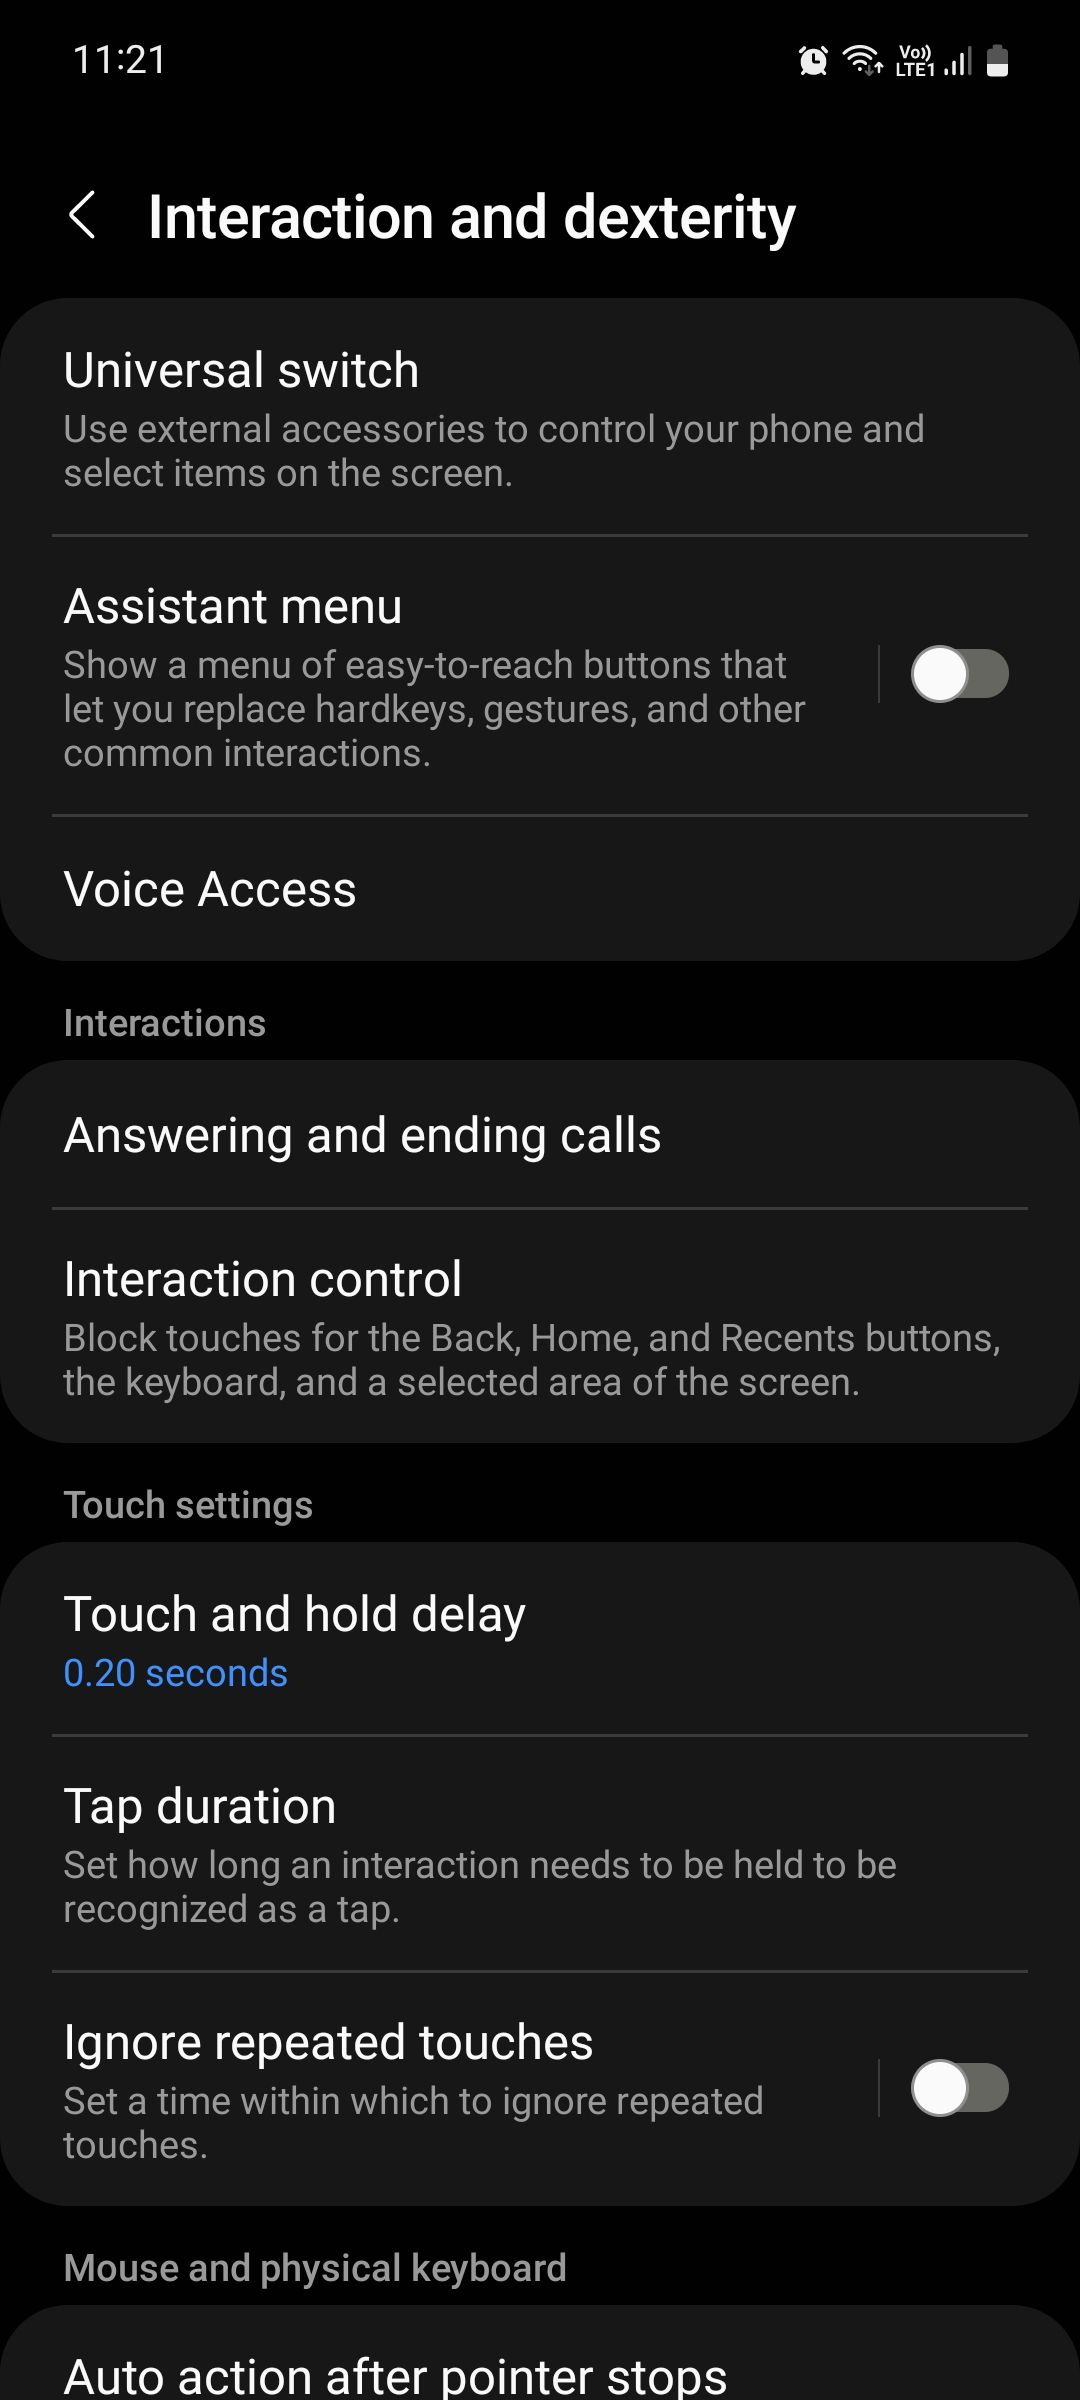 Samsung Interaction and dexterity